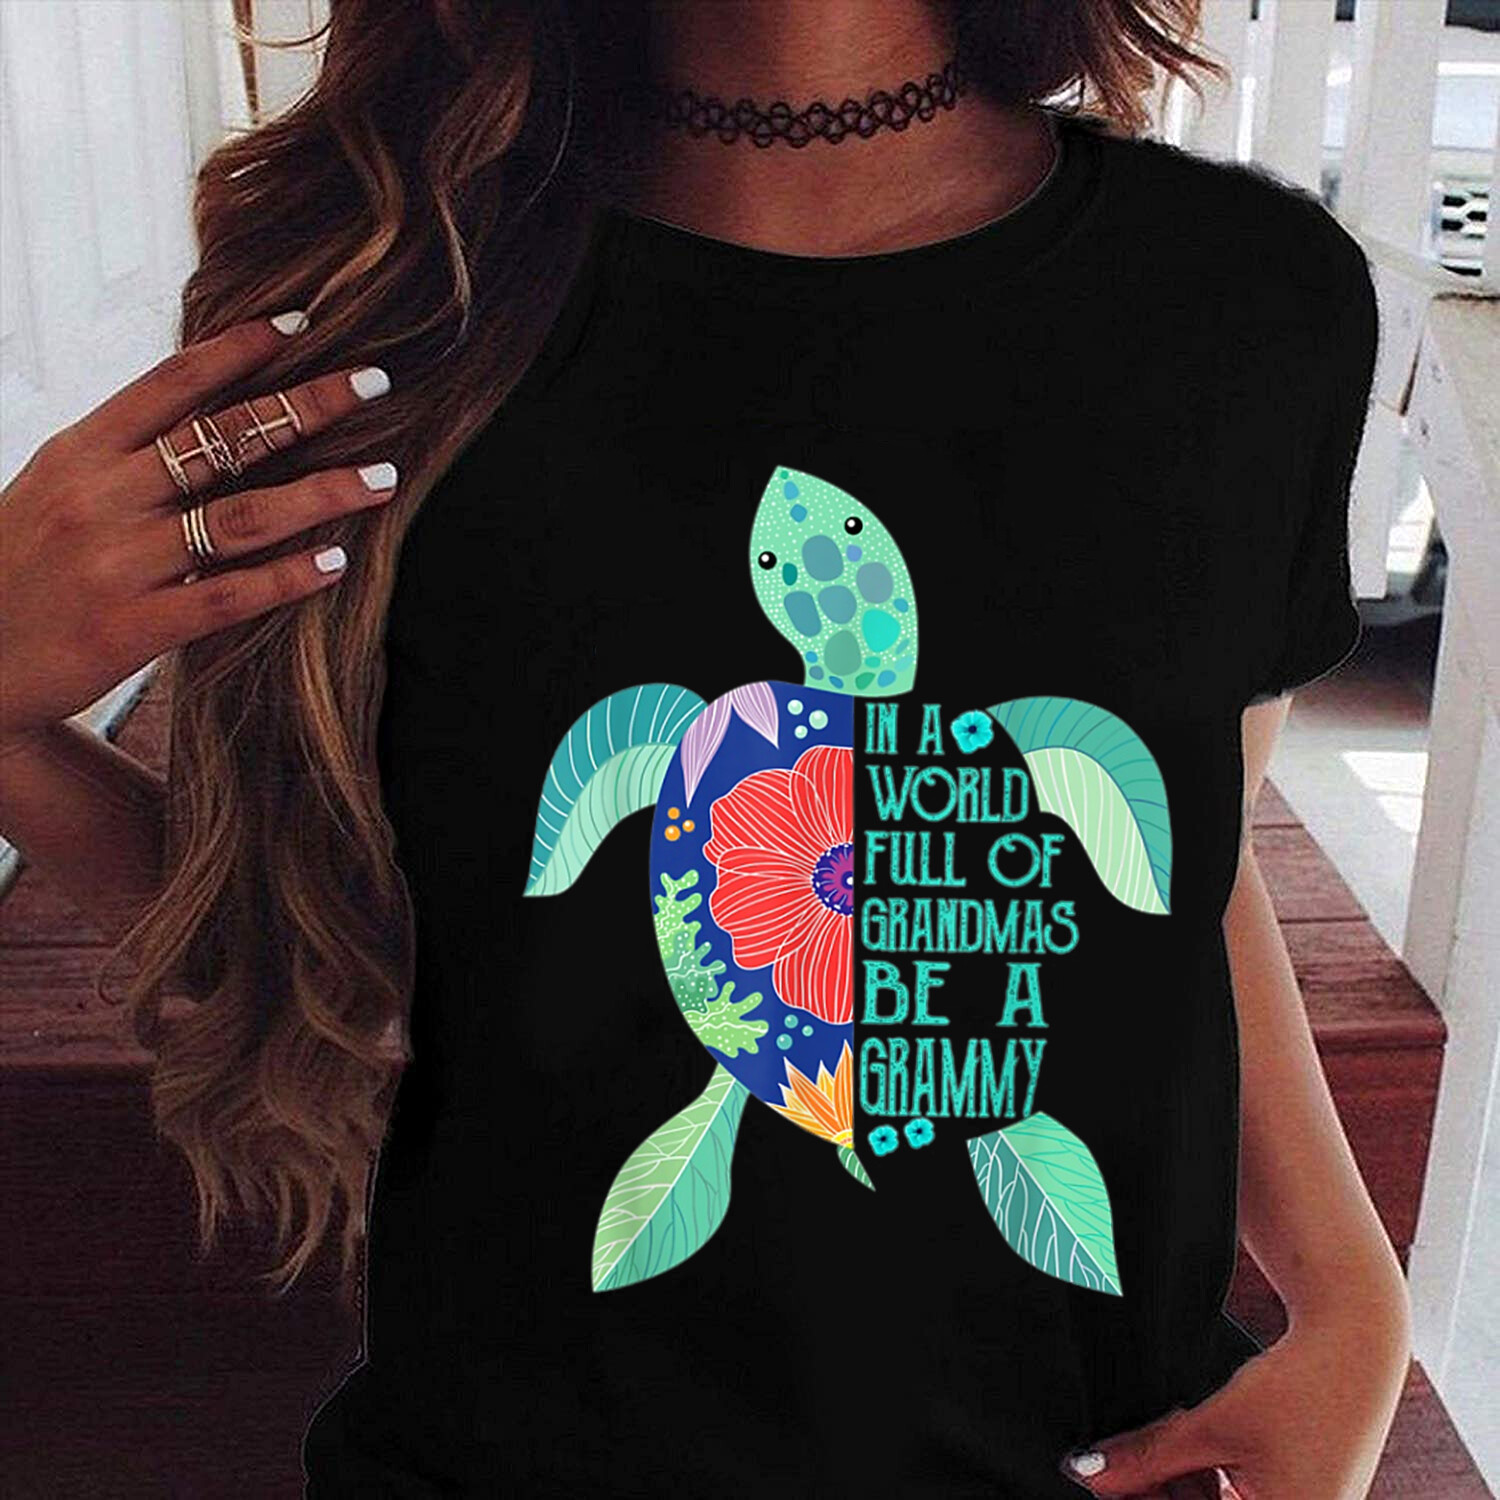 In a world full of Grandmas be a Grammy Turtle T-Shirt,grammy shirt,Mimi Shirt, Nana shirt, Grandma shirt, Mother's Day shirt, Sea Turtle Shirt, Love Turtle, Turtle lover shirt